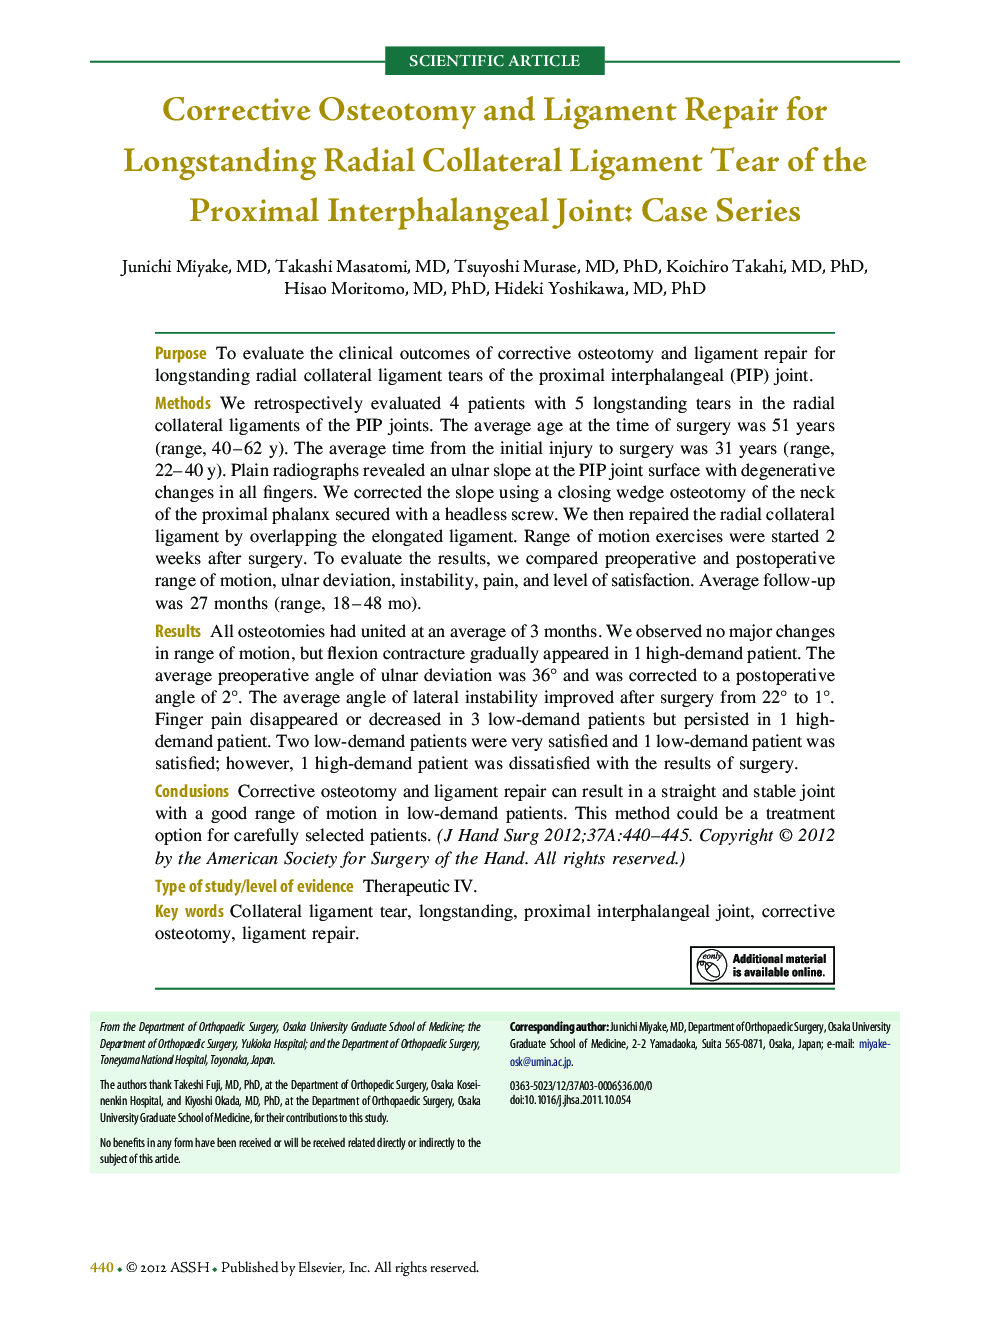 Corrective Osteotomy and Ligament Repair for Longstanding Radial Collateral Ligament Tear of the Proximal Interphalangeal Joint: Case Series 